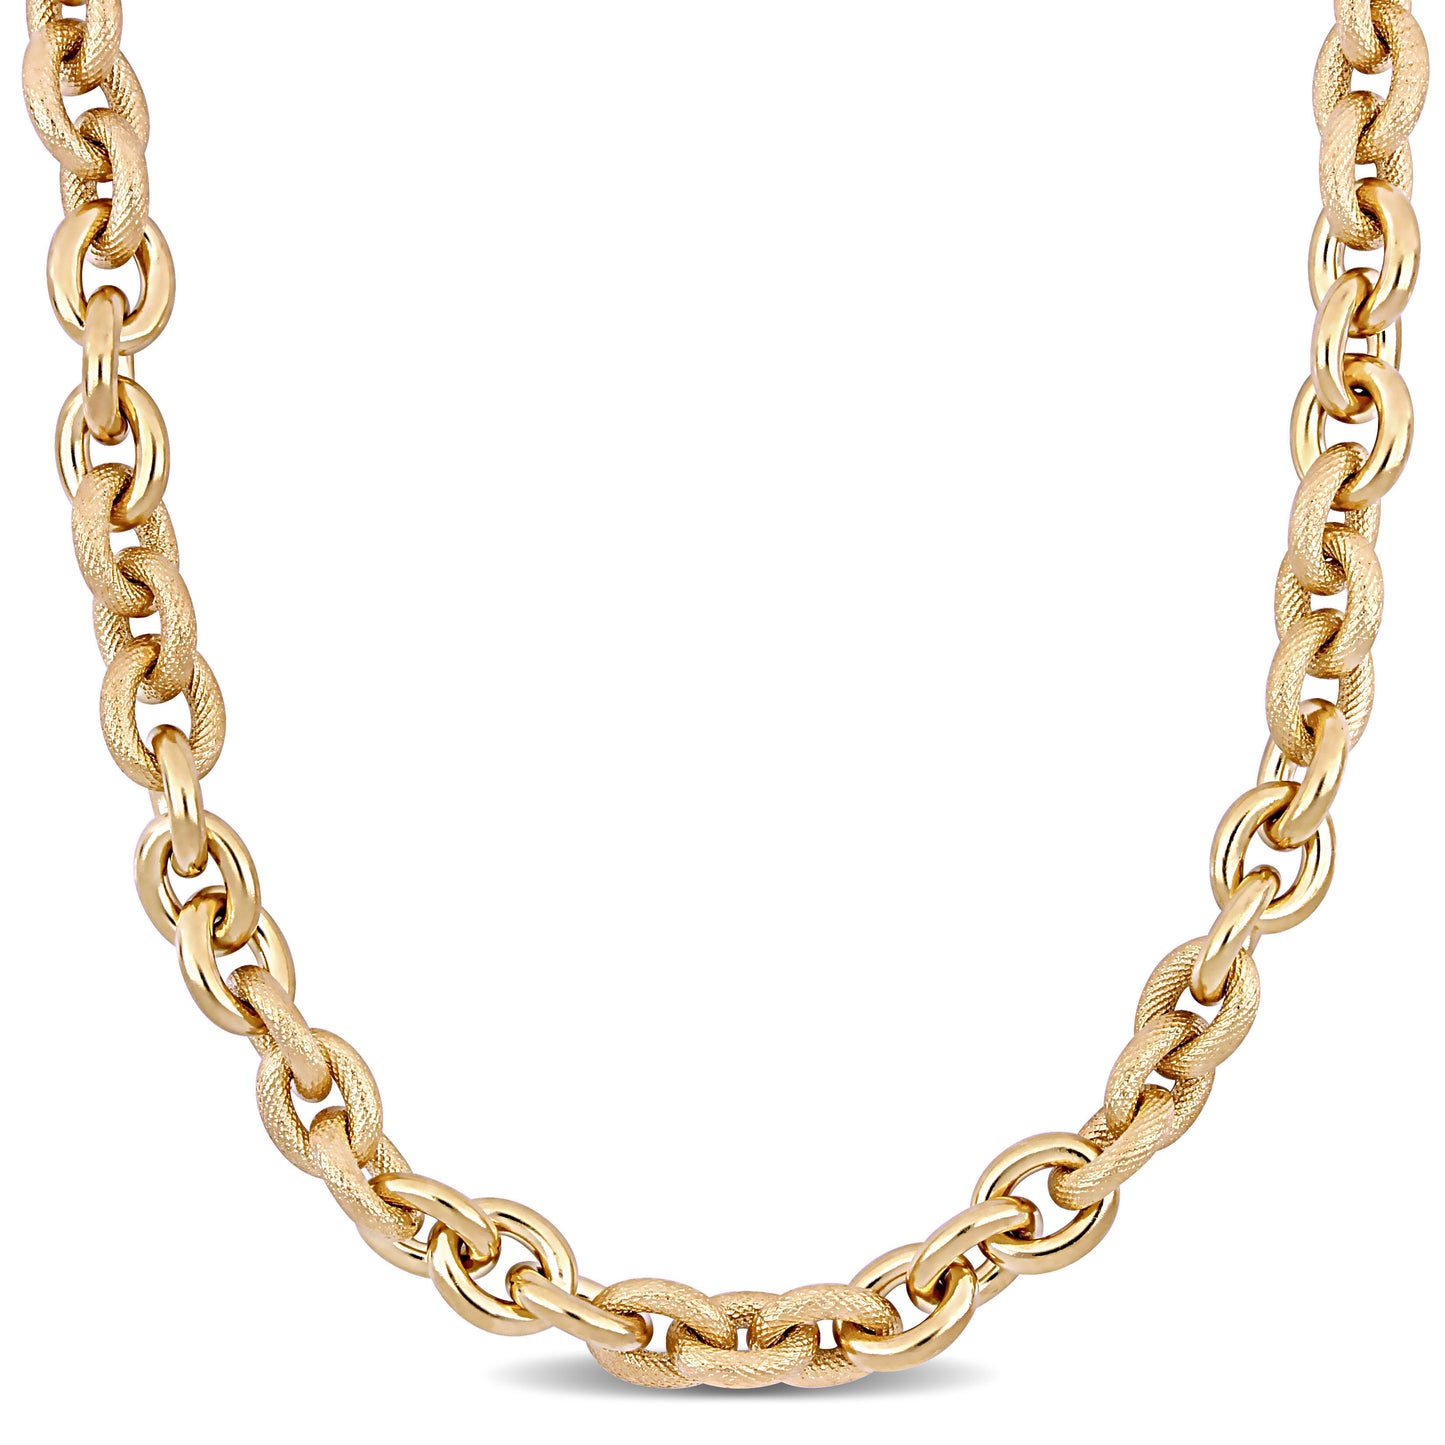 Oval Link Textured Chain in Yellow Silver